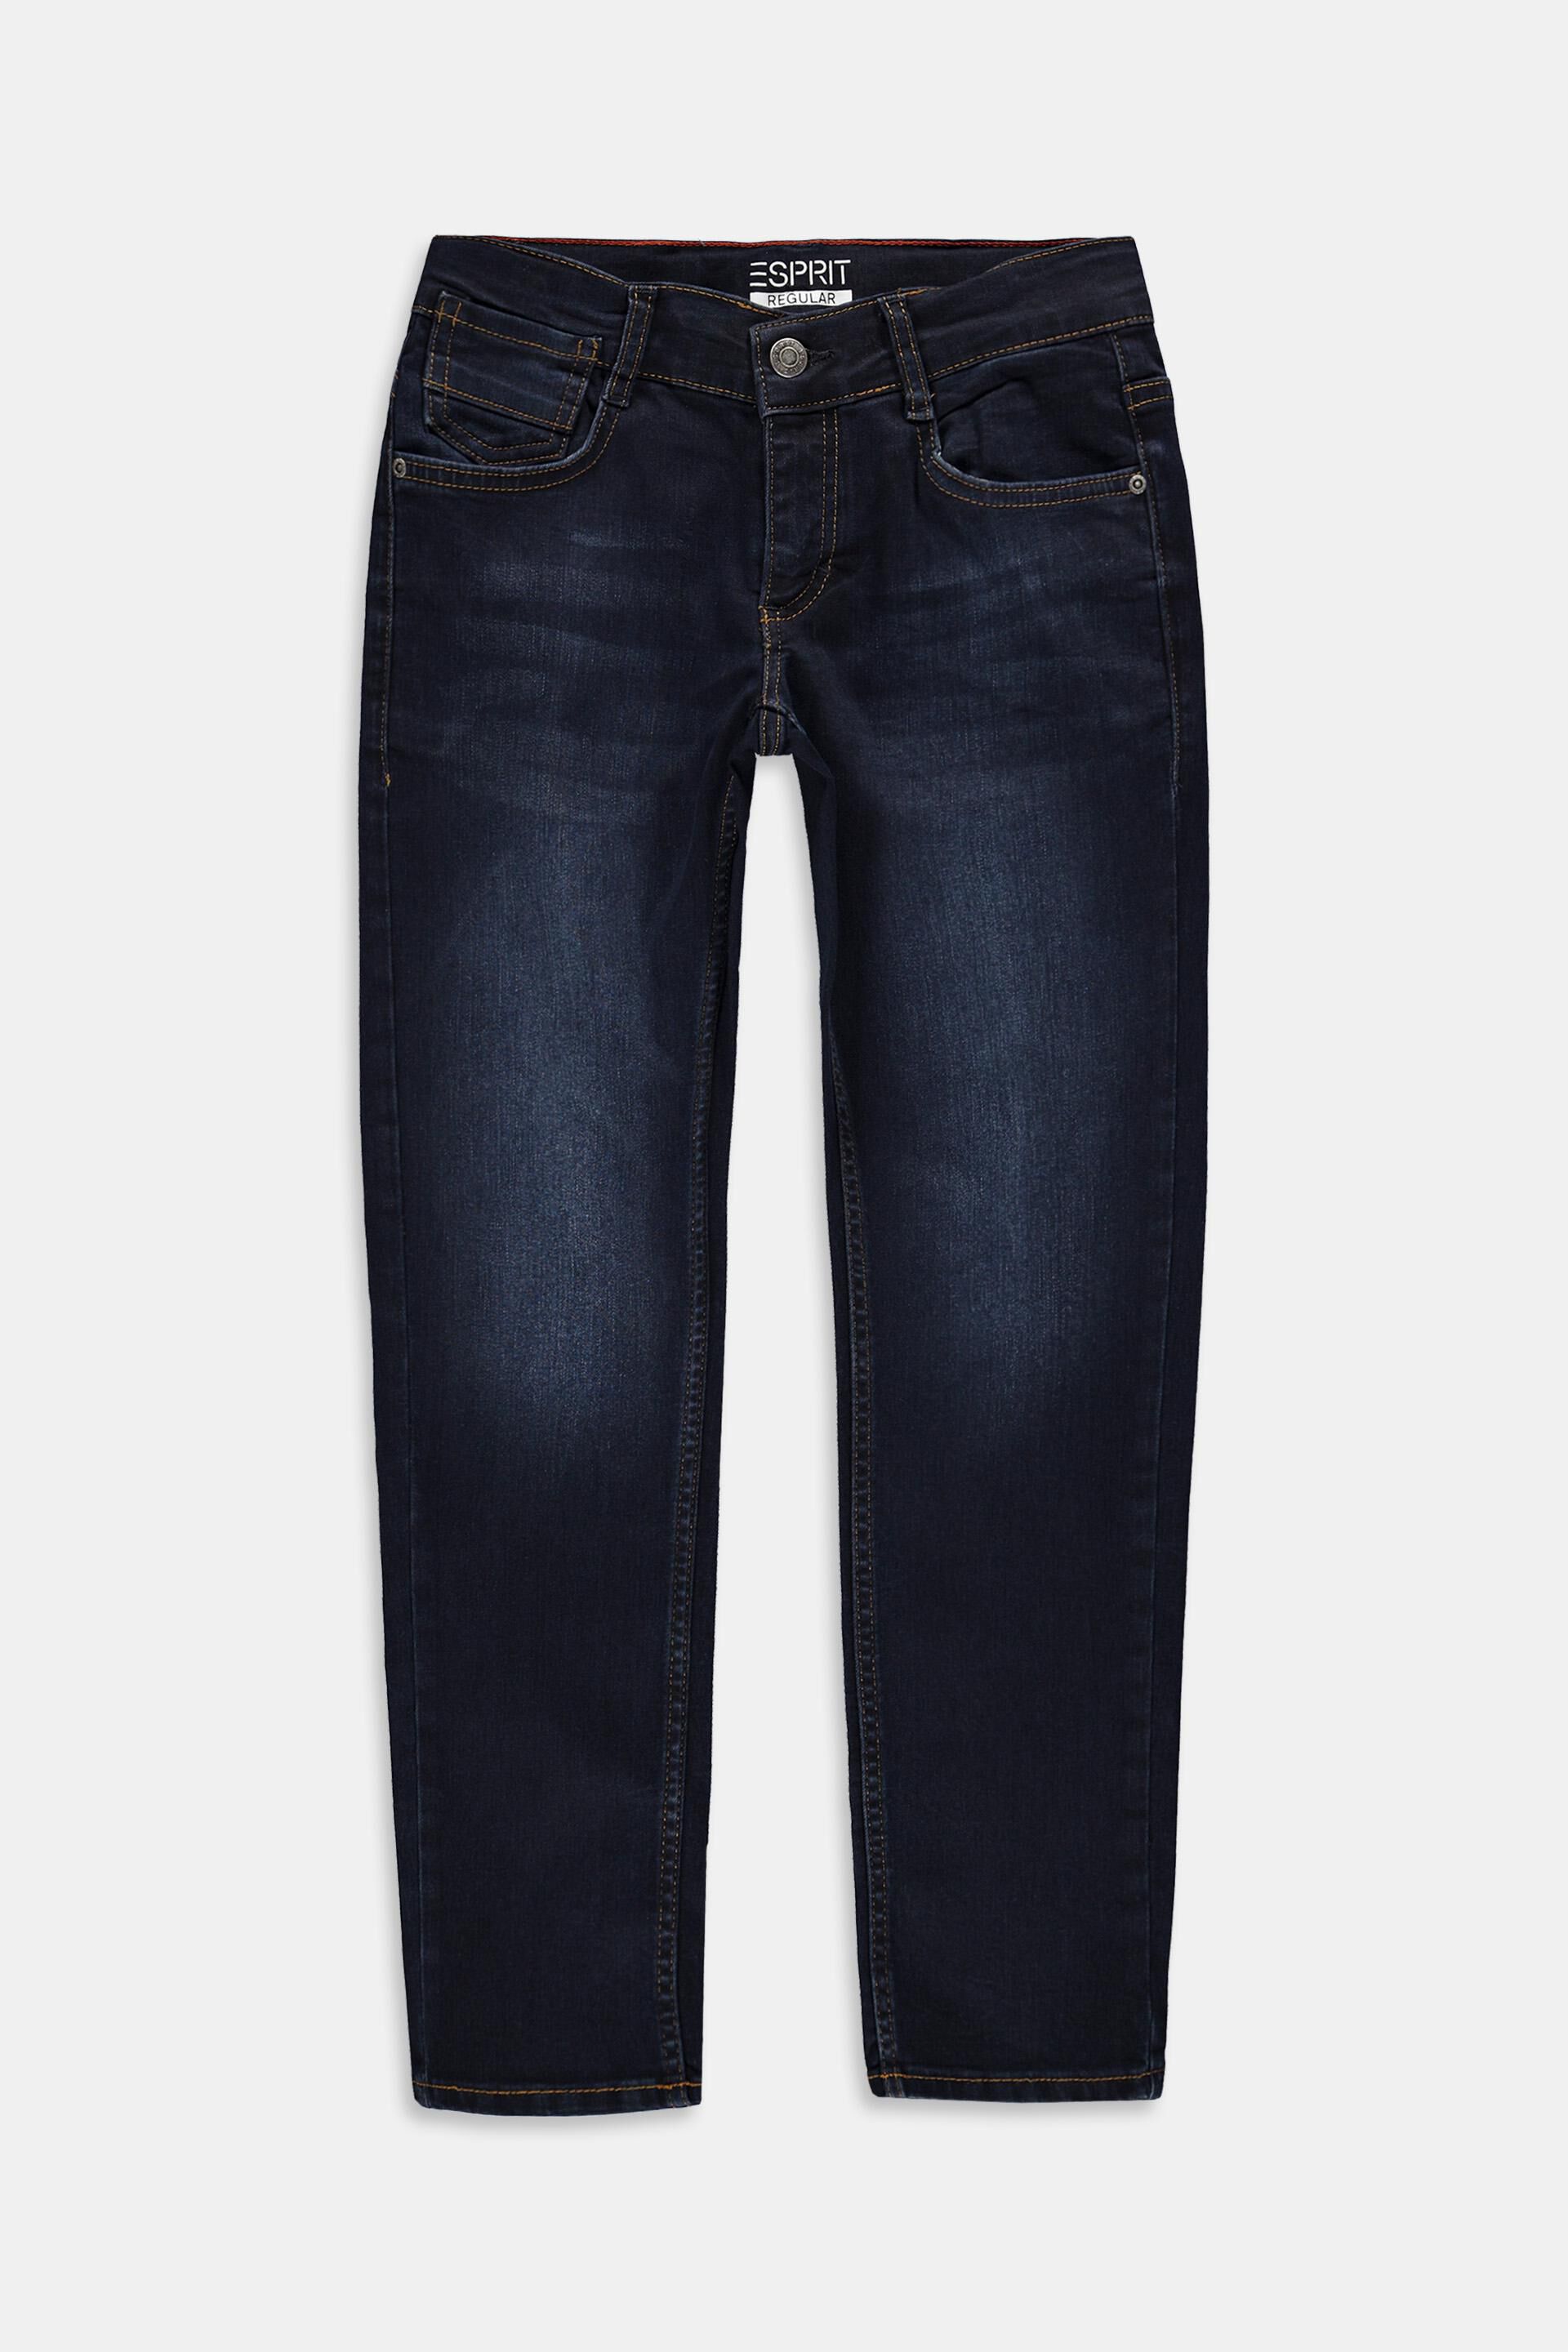 Esprit with adjustable waistband Jeans